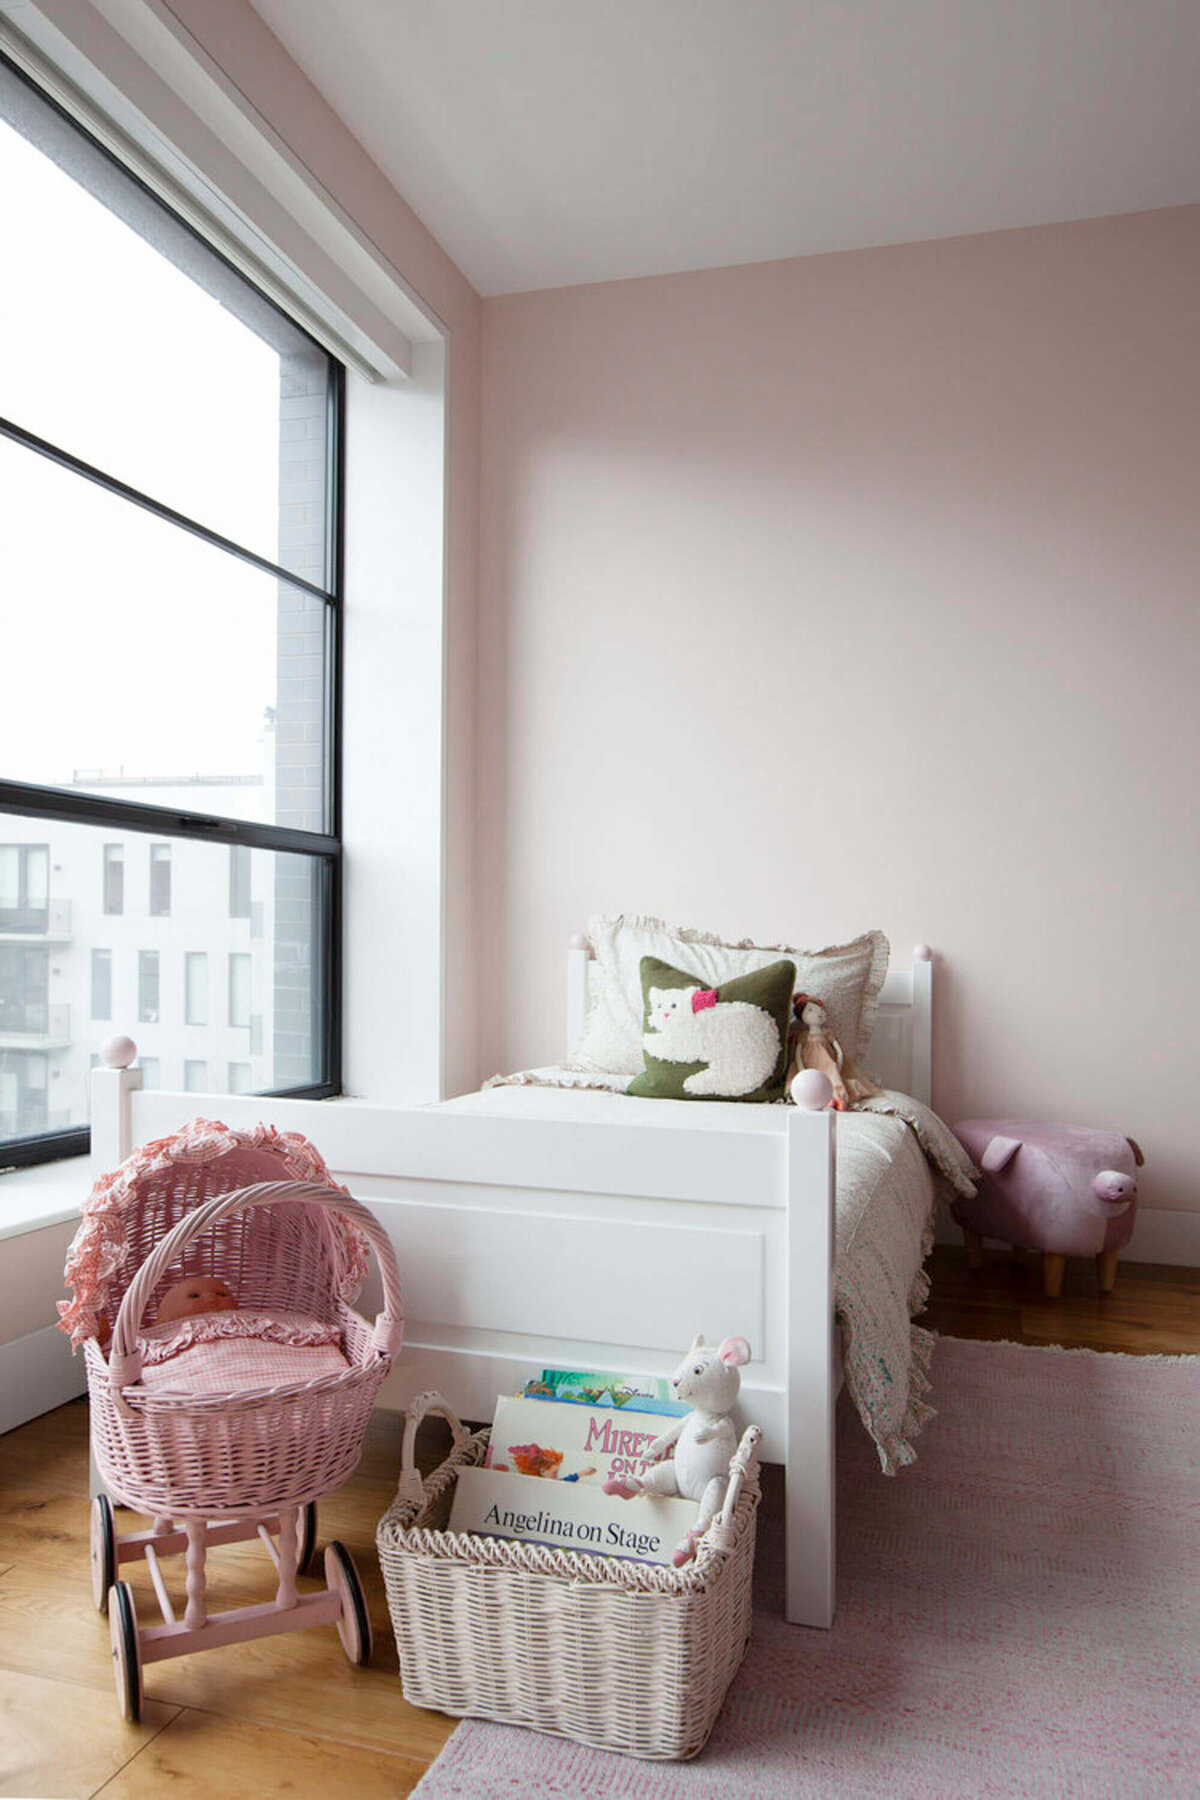 Stylish kids room with white bed and cat pillow, toy baby strollers